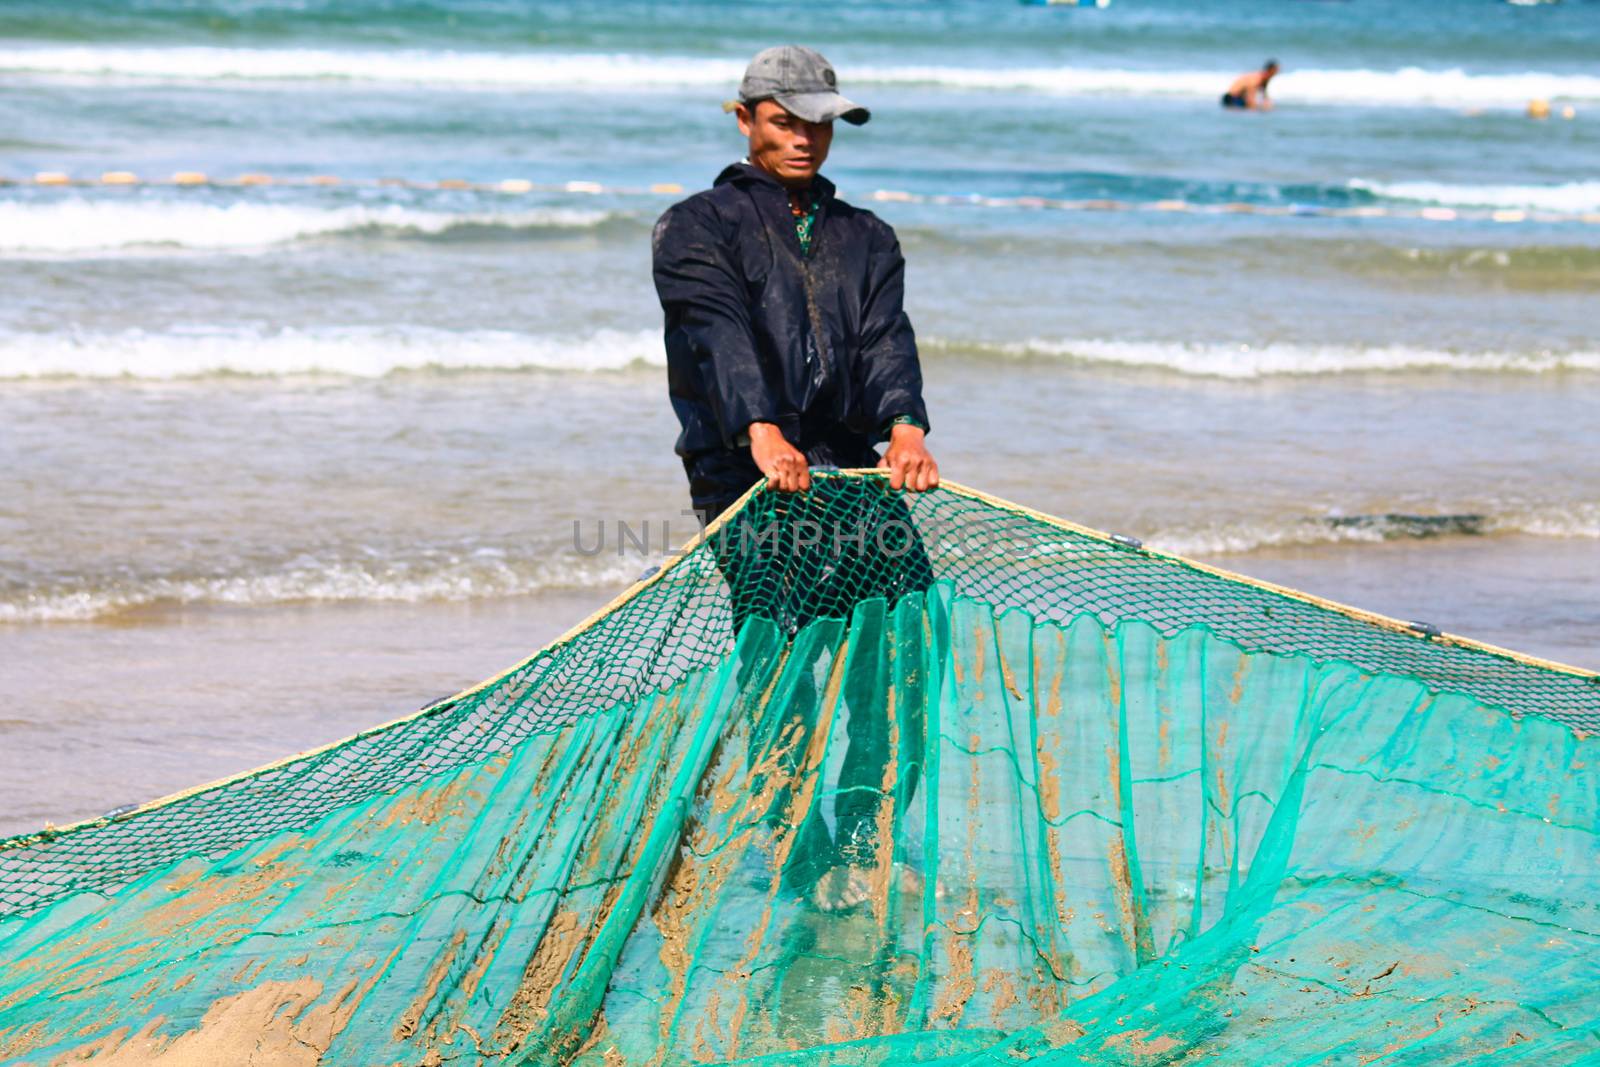 Editorial. Vietnamese fisherman pulling the nets back to shore in the fishing village of Quy Nhon